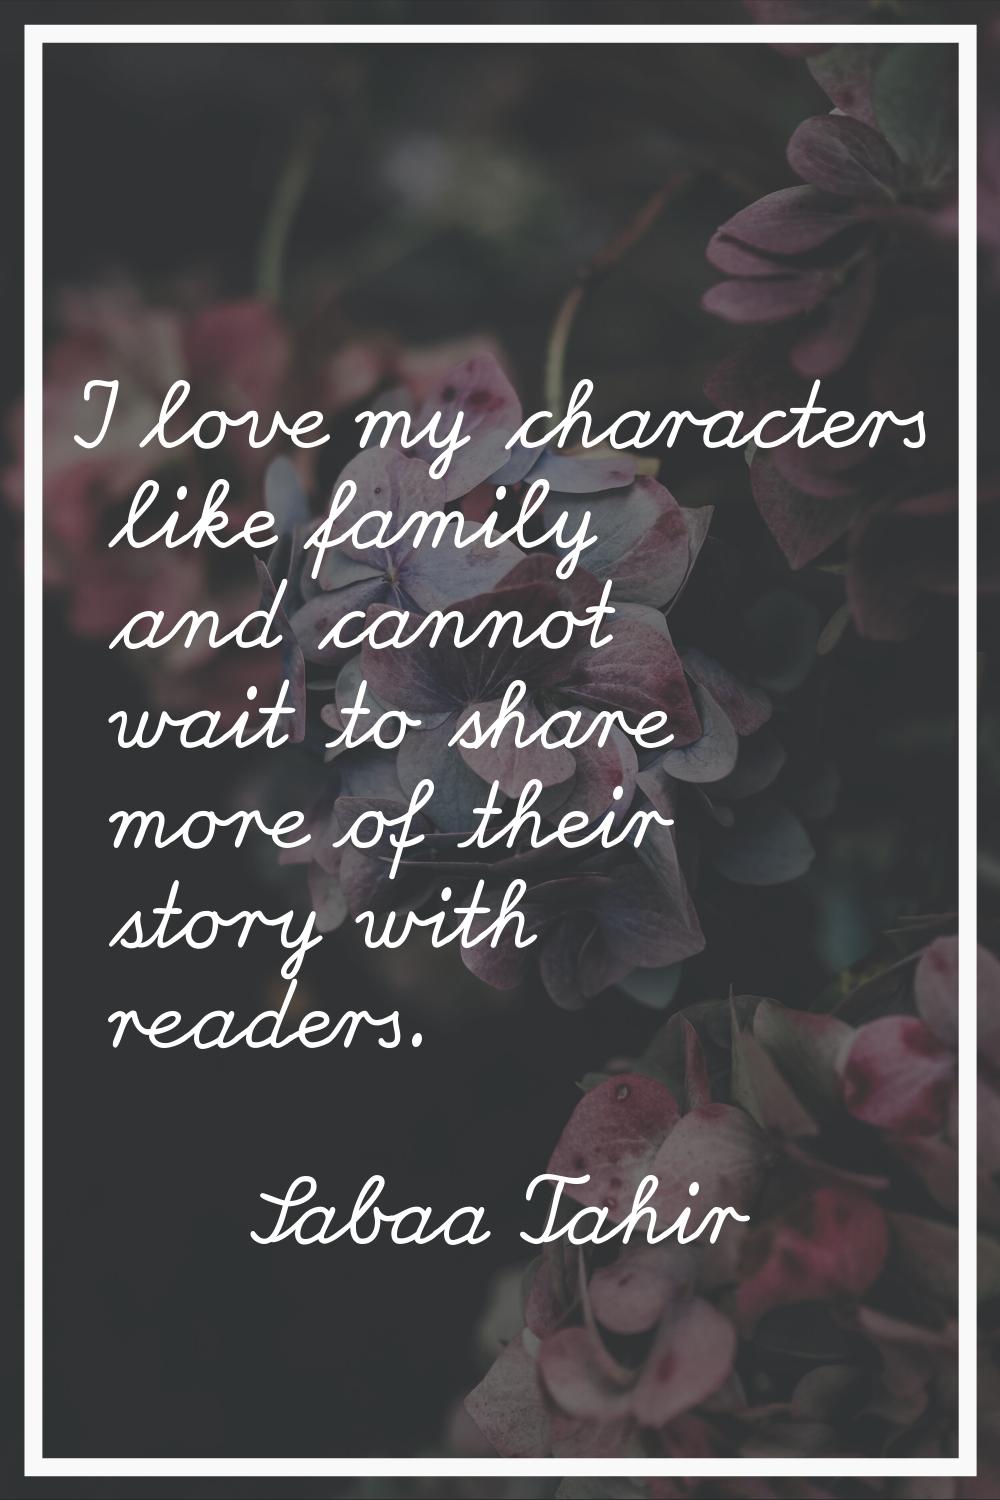 I love my characters like family and cannot wait to share more of their story with readers.